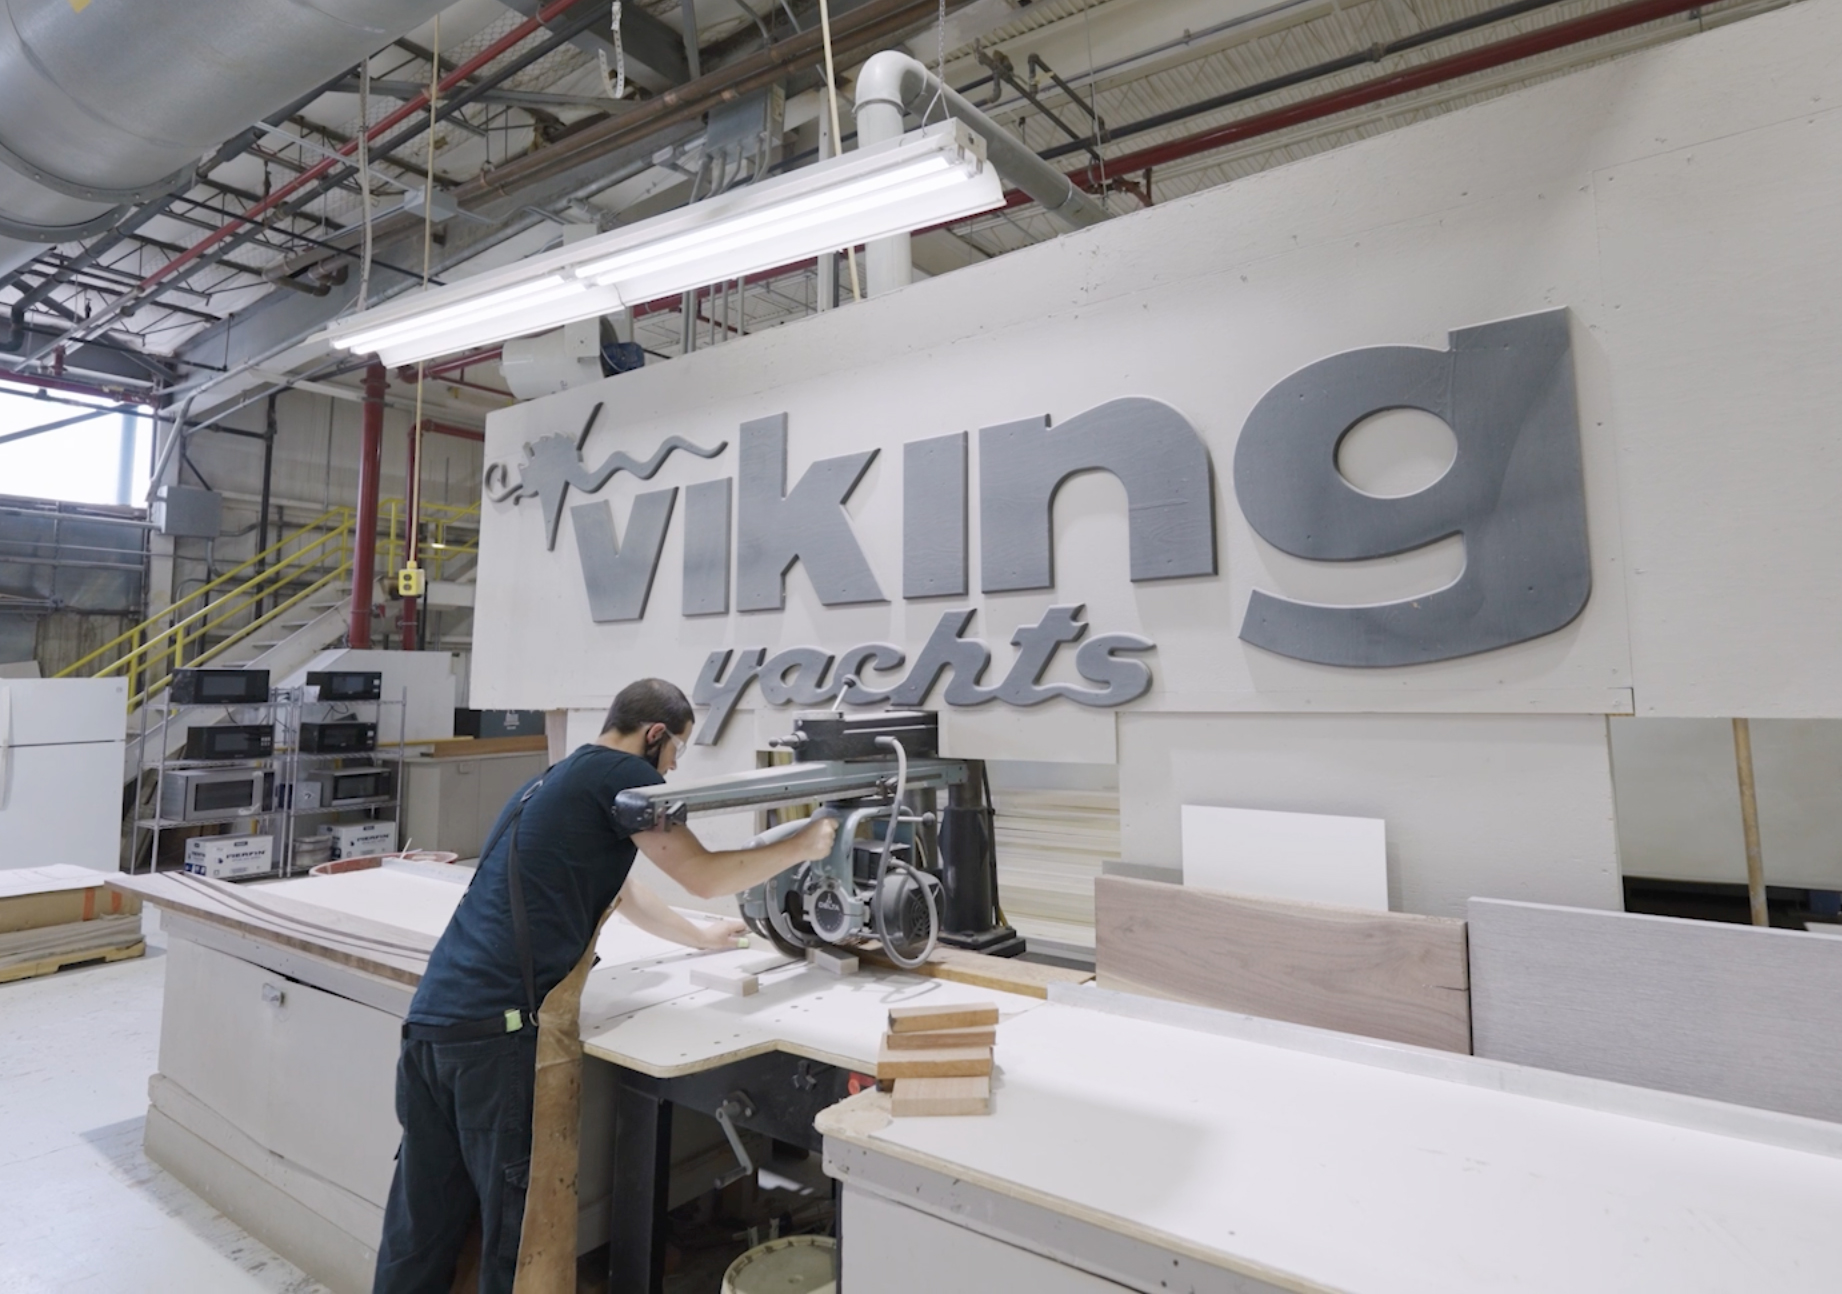 Factory Fridays: Inside Viking Yachts Manufacturing Process - EP. 16